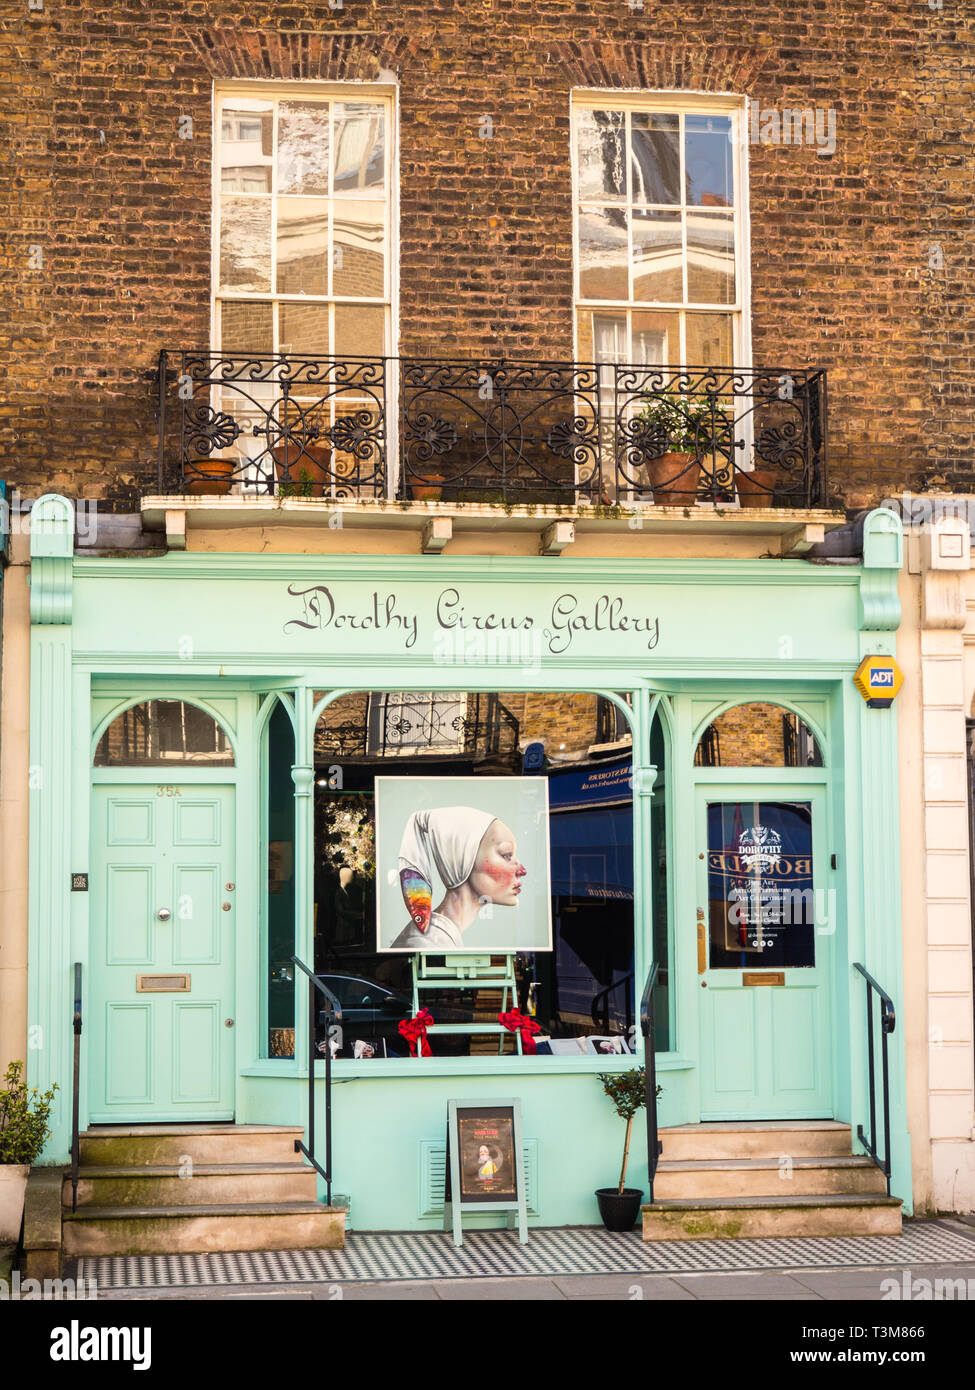 Dorothy Zirkus Gallery in London, Connaught Road, Connaught Dorf, Westminster, London, England, UK, GB. Stockfoto